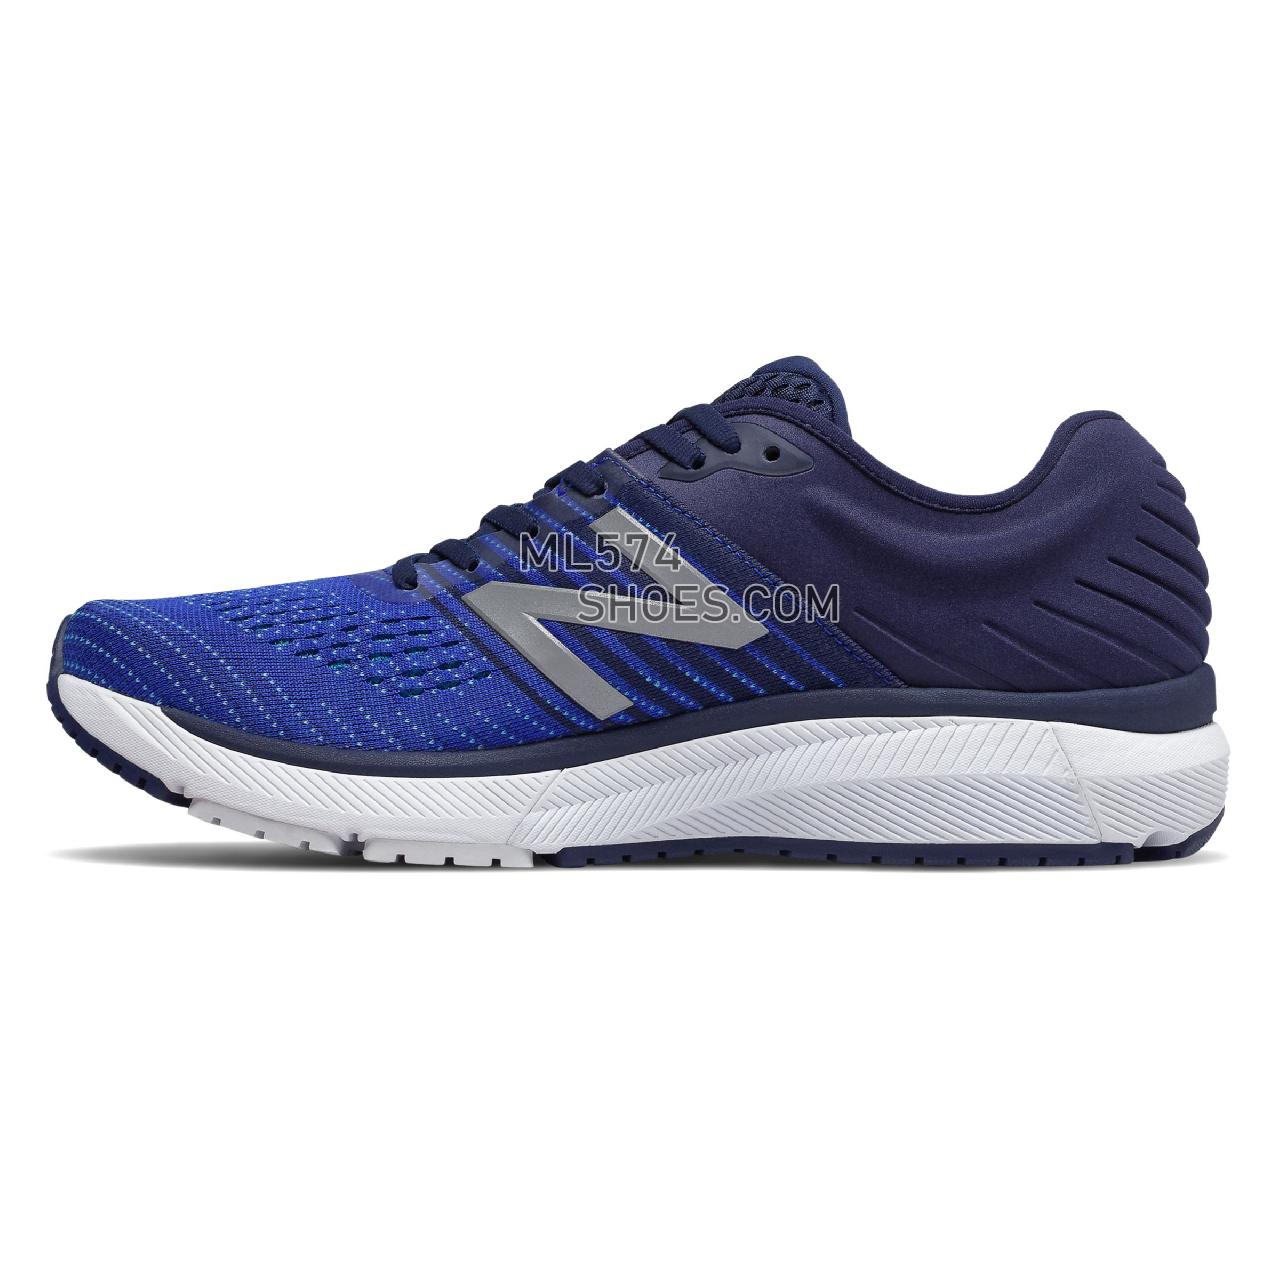 New Balance 860v10 - Men's Stability Running - UV Blue with Bayside and Pigment - M860B10